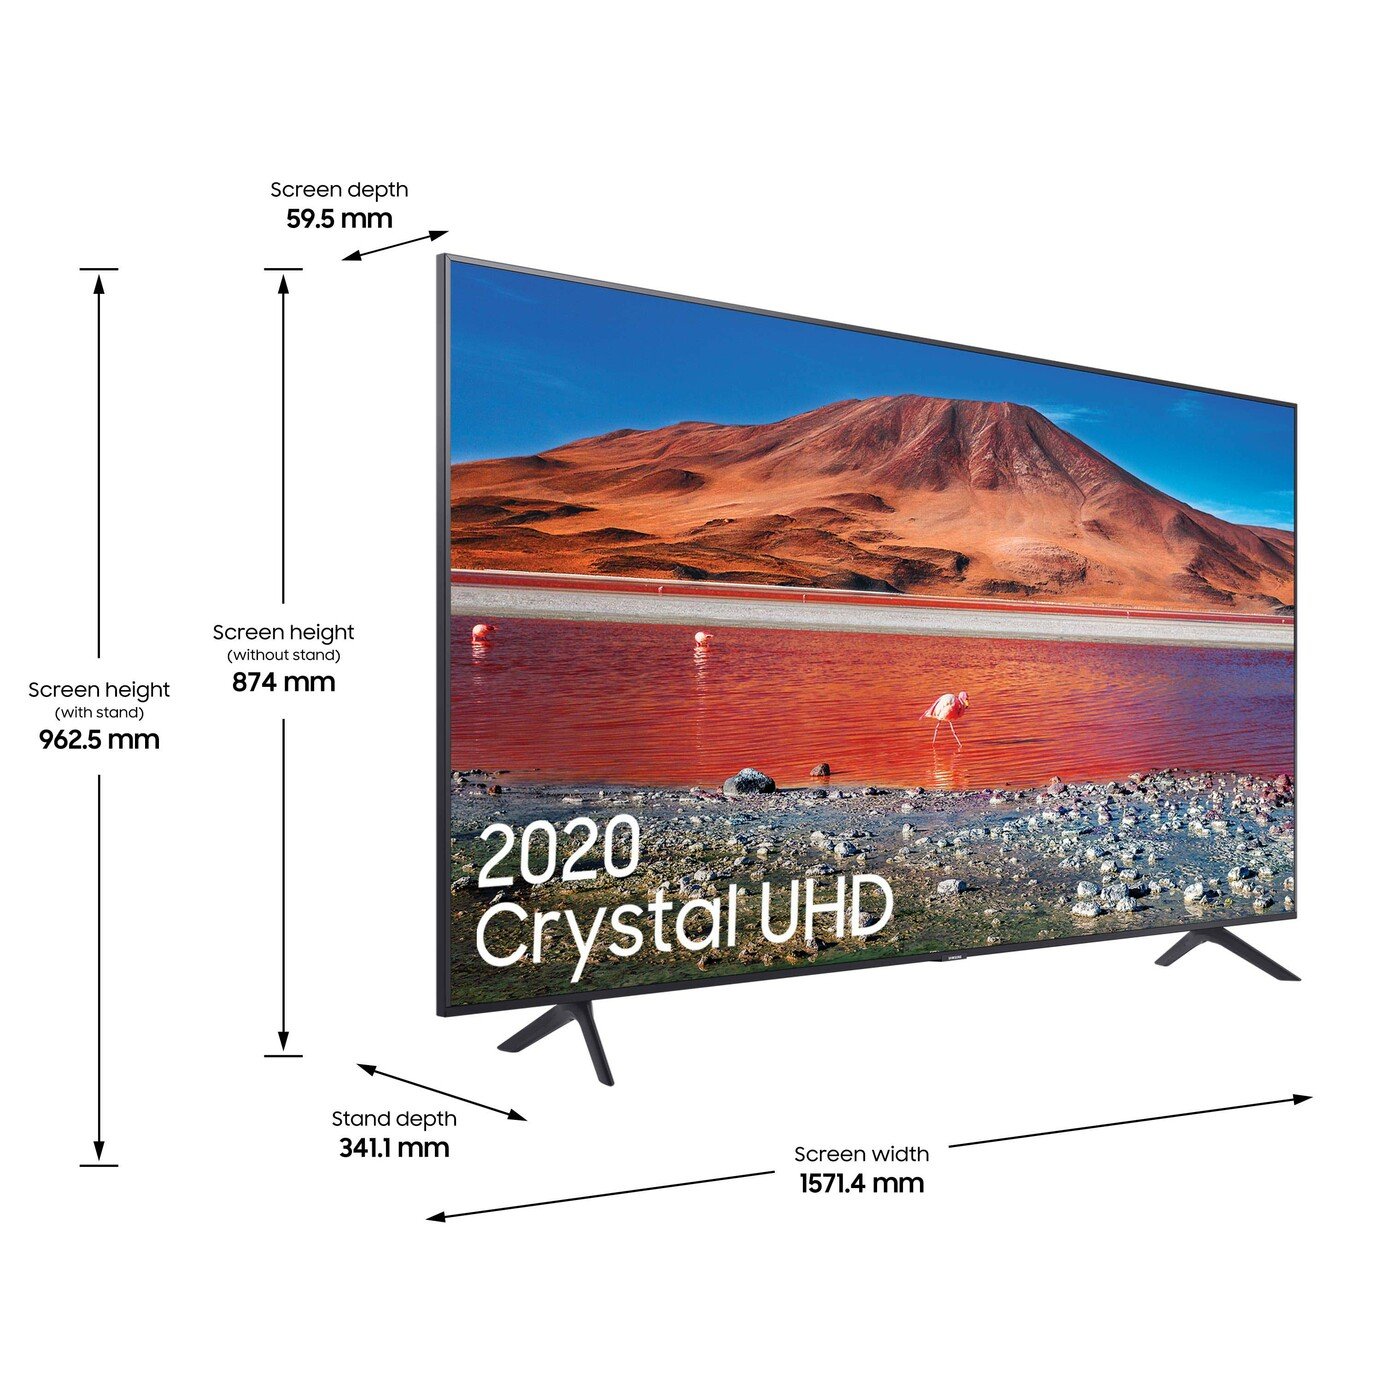 Samsung 70 Inch UE70TU7100KXXU Smart 4K LED TV with HDR Review